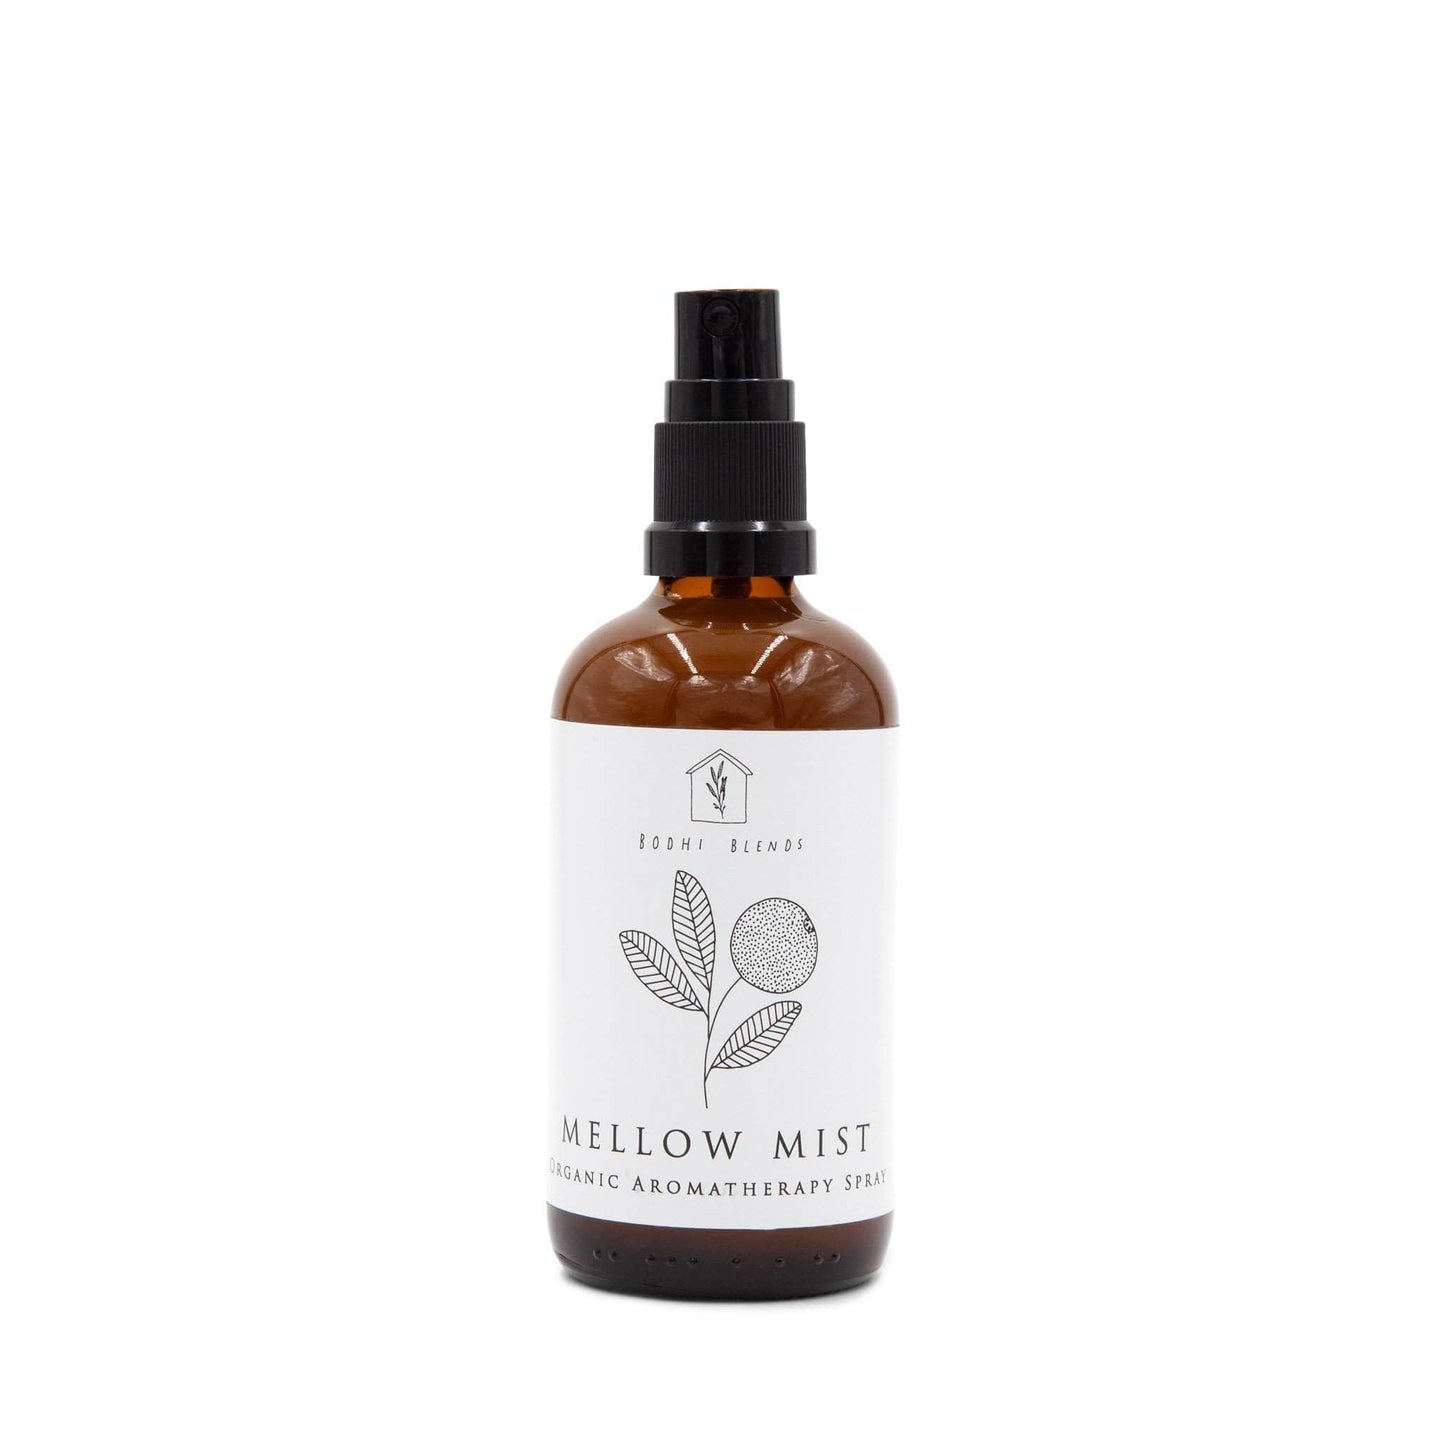 Bodhi Blends Home Fragrance Bodhi Blends Mellow Mist Aromatherapy Room Spray - 100ml